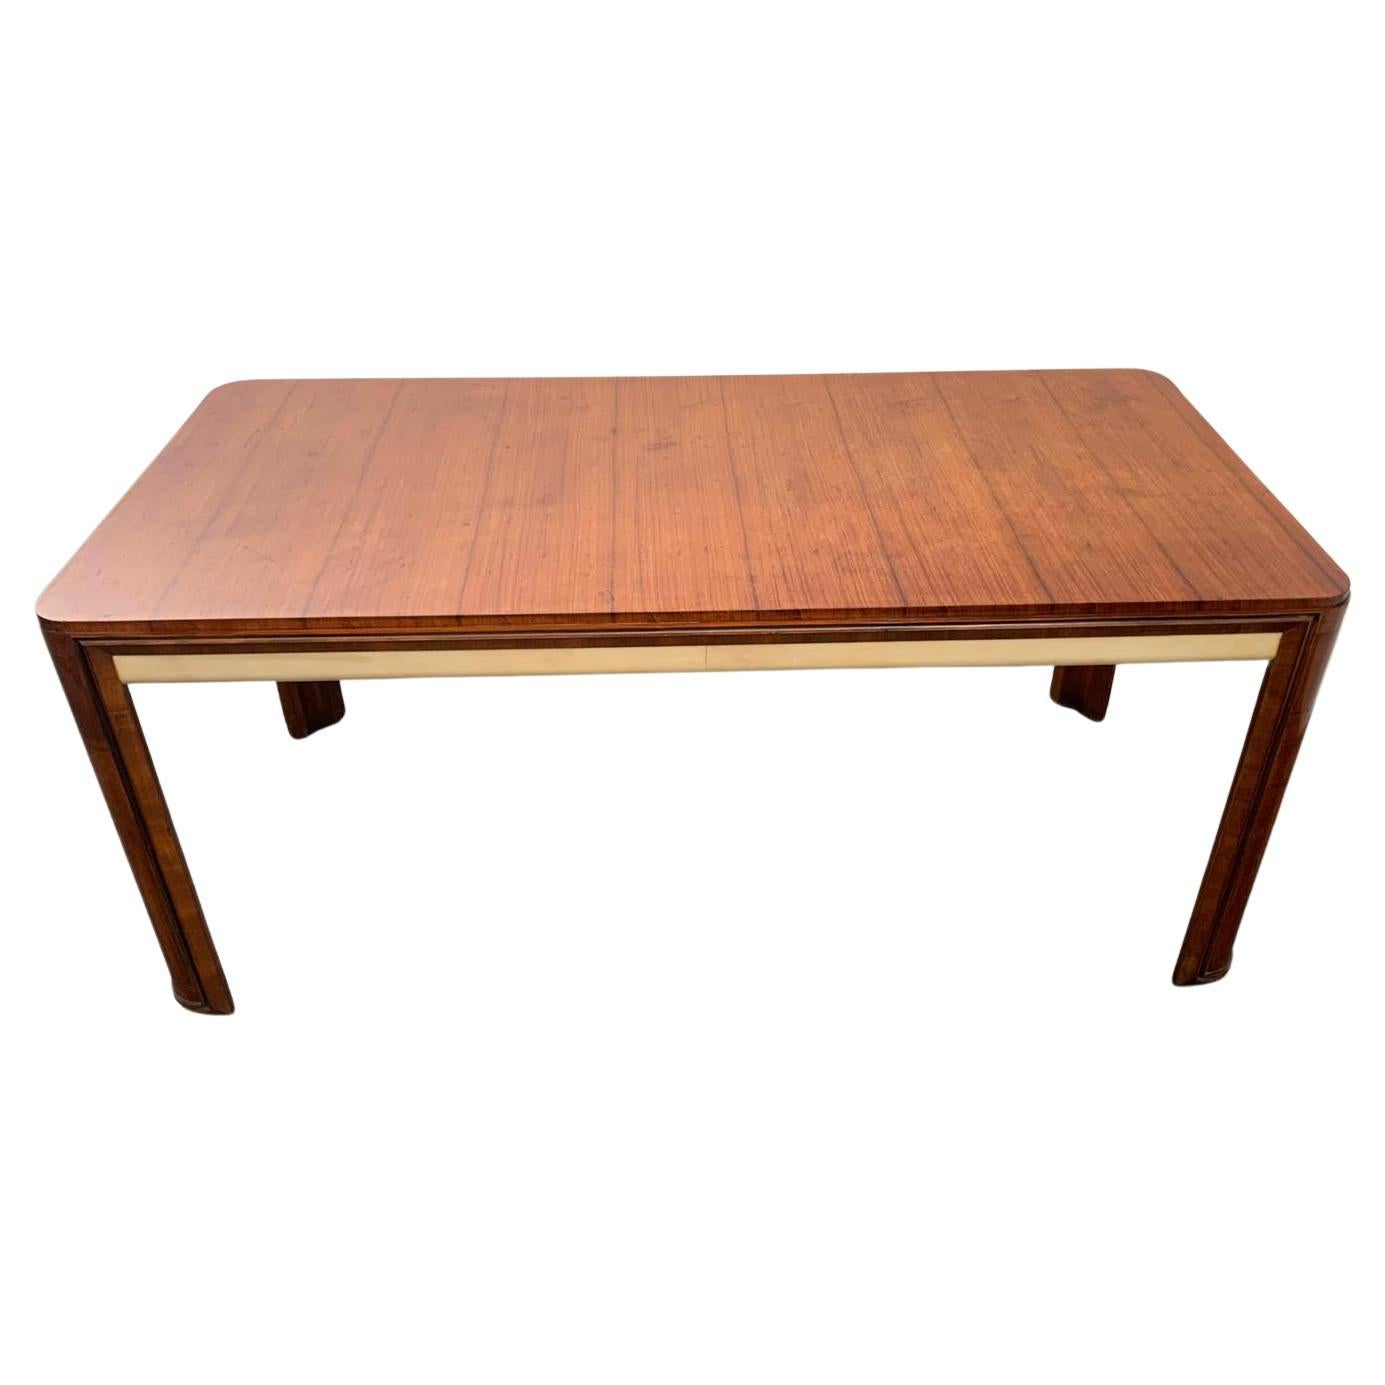 Art Deco Table in Rosewood and Parchment by Pietro Busnelli